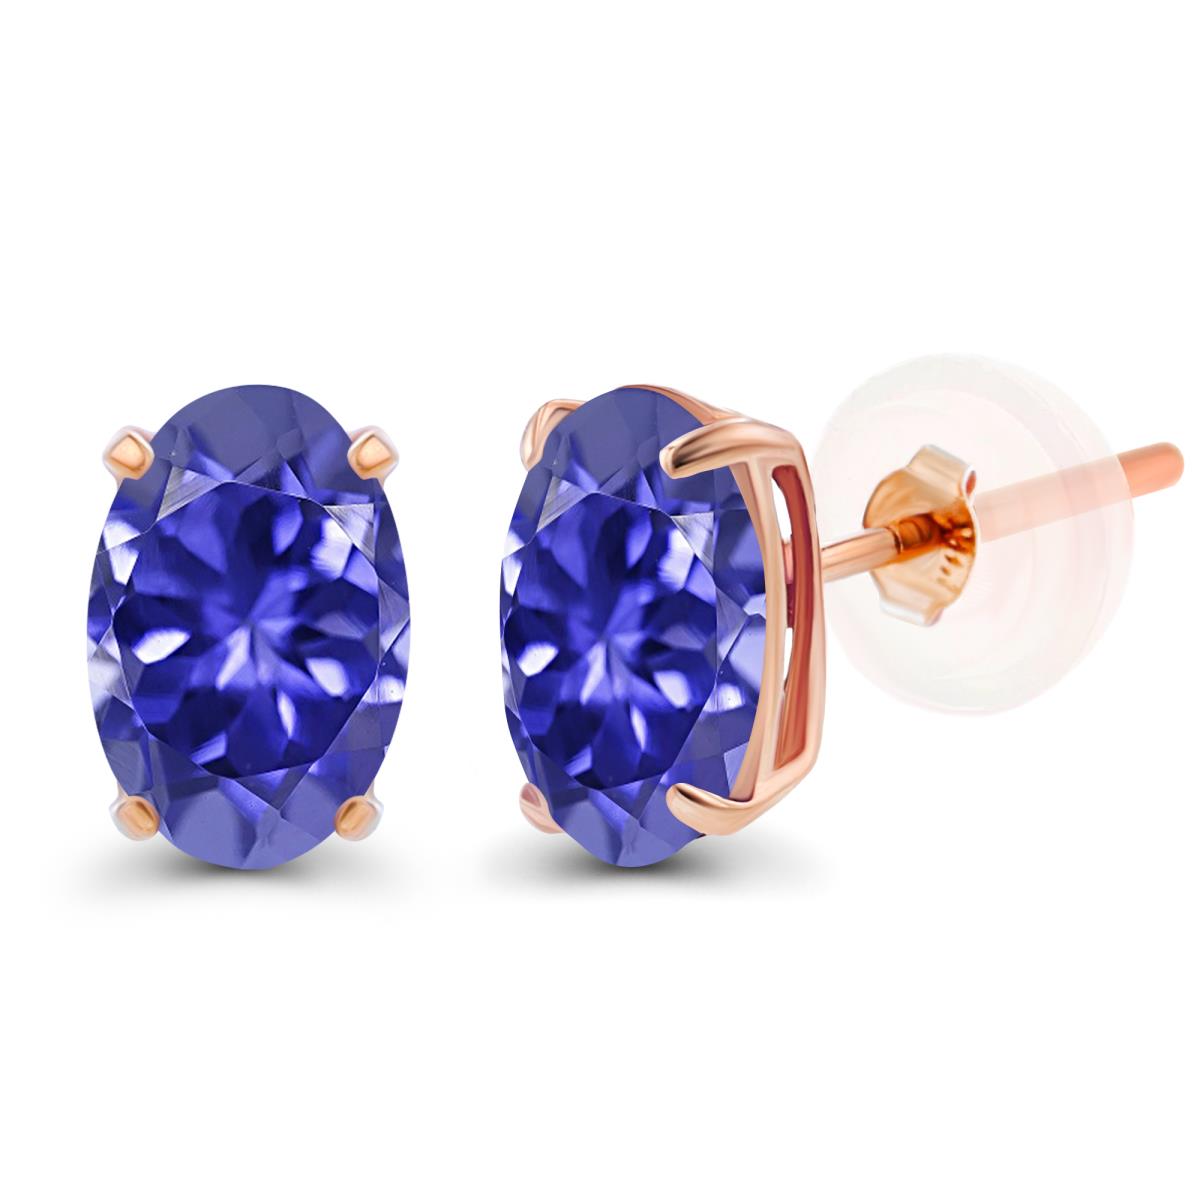 14K Rose Gold 5x3mm Oval Tanzanite Basket Stud Earrings with Silicone Backs